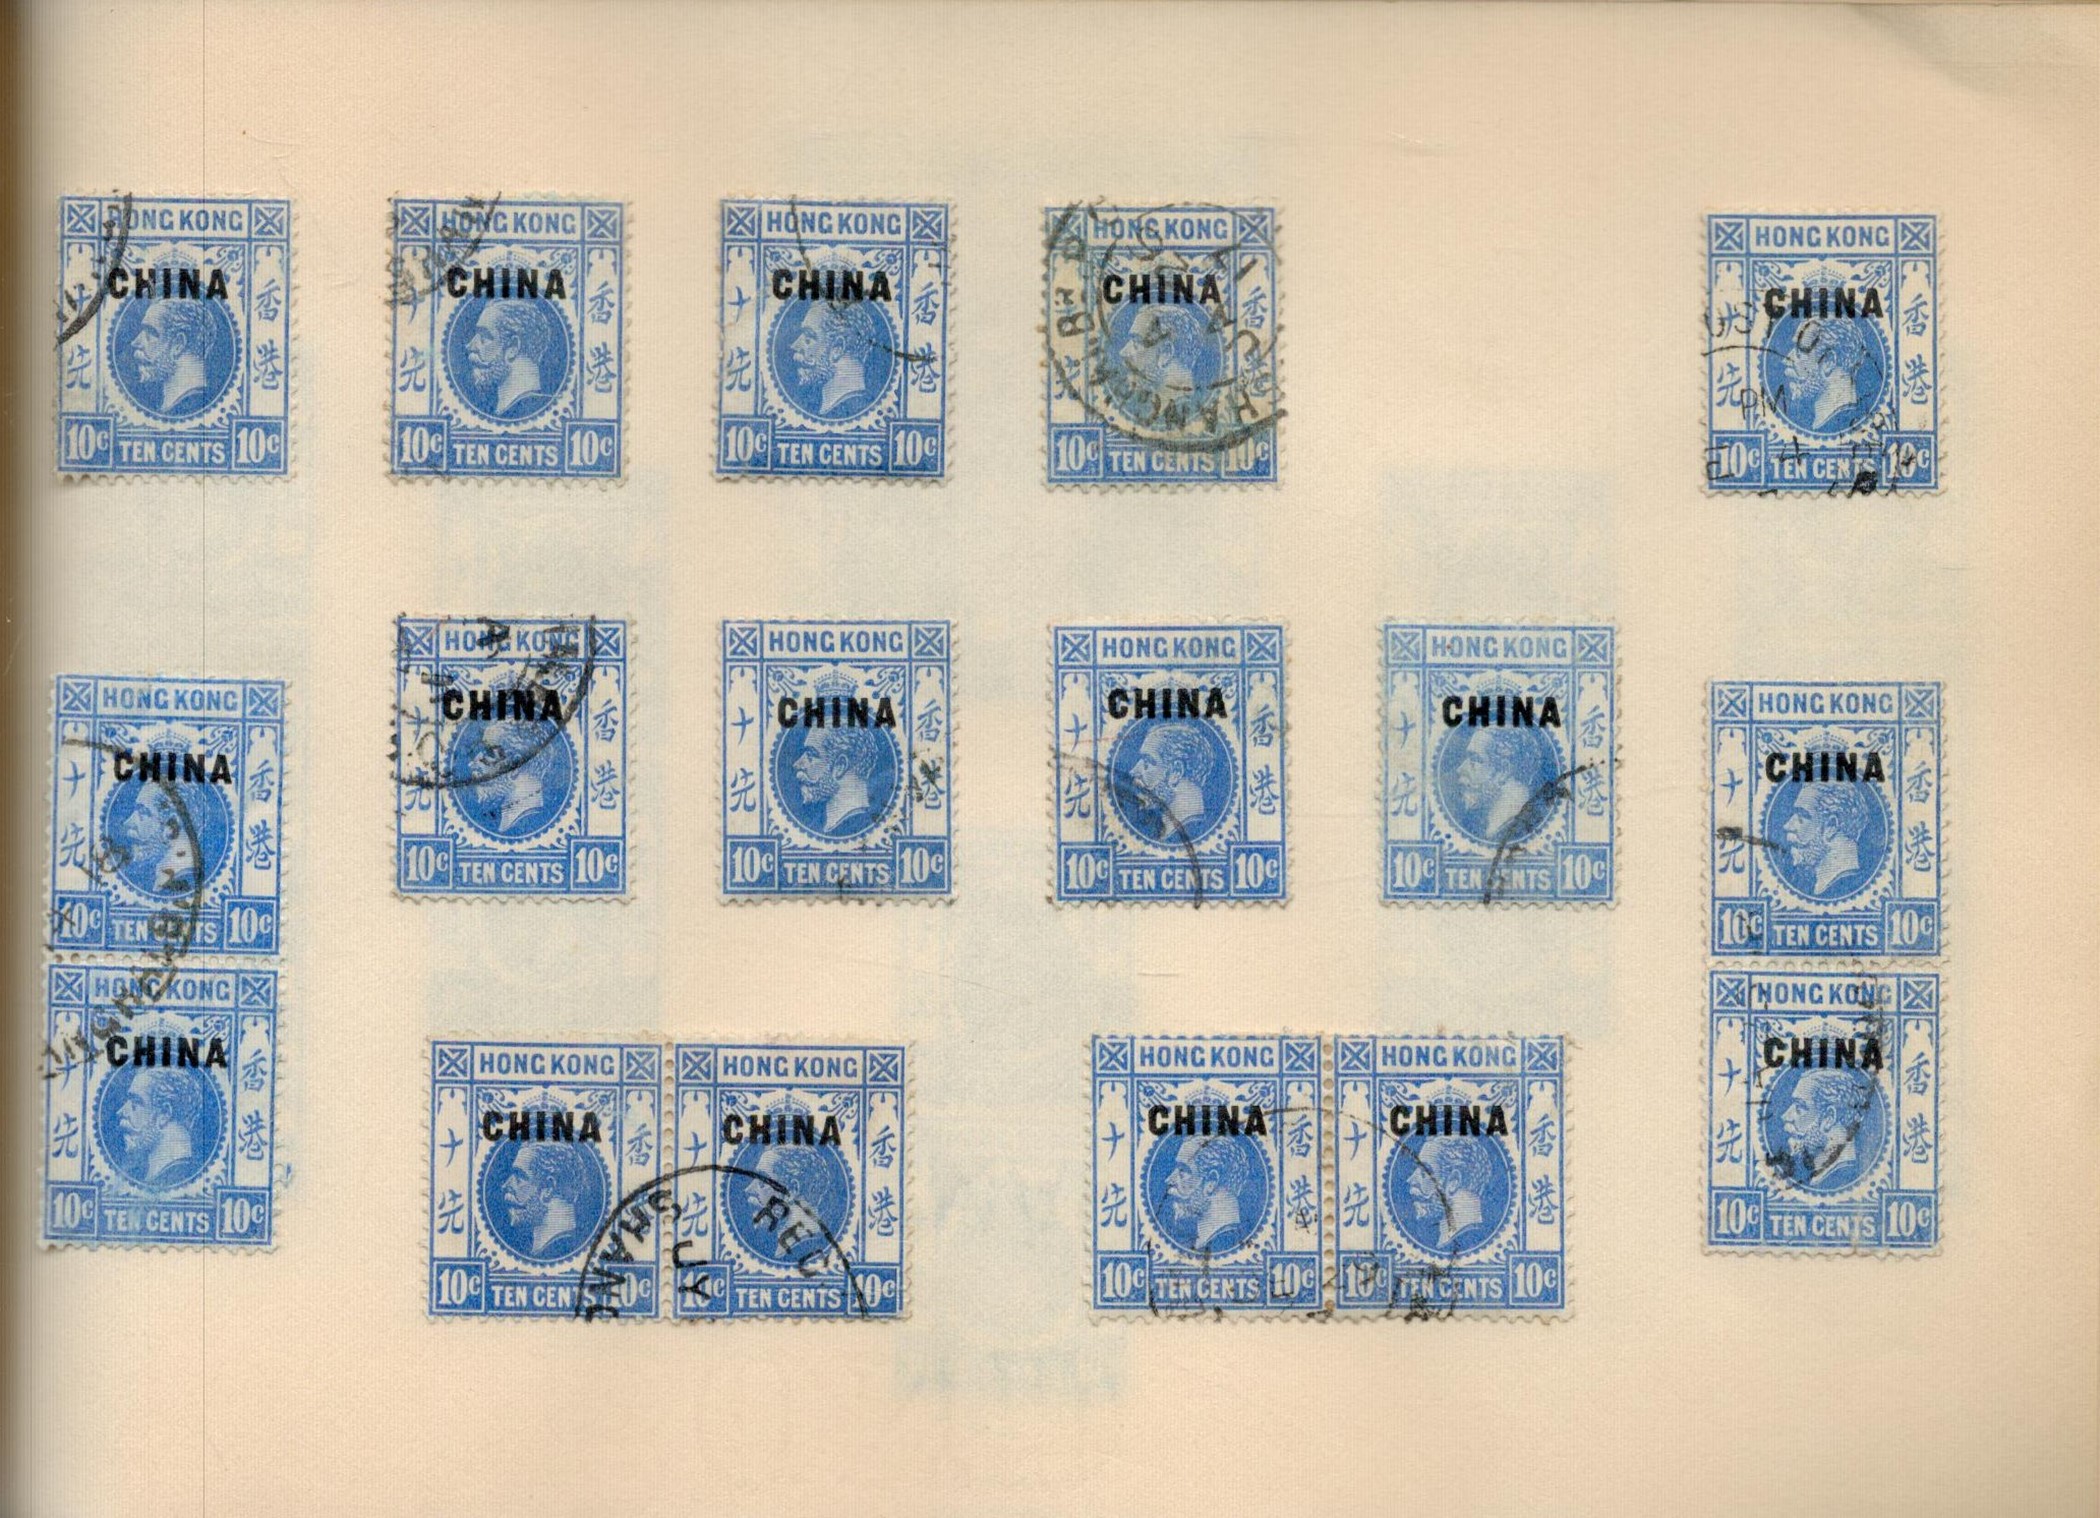 Worldwide Stamps in a Twinlock Crown Loose Leaf Binder countries include India, China, Gold Coast, - Image 3 of 4